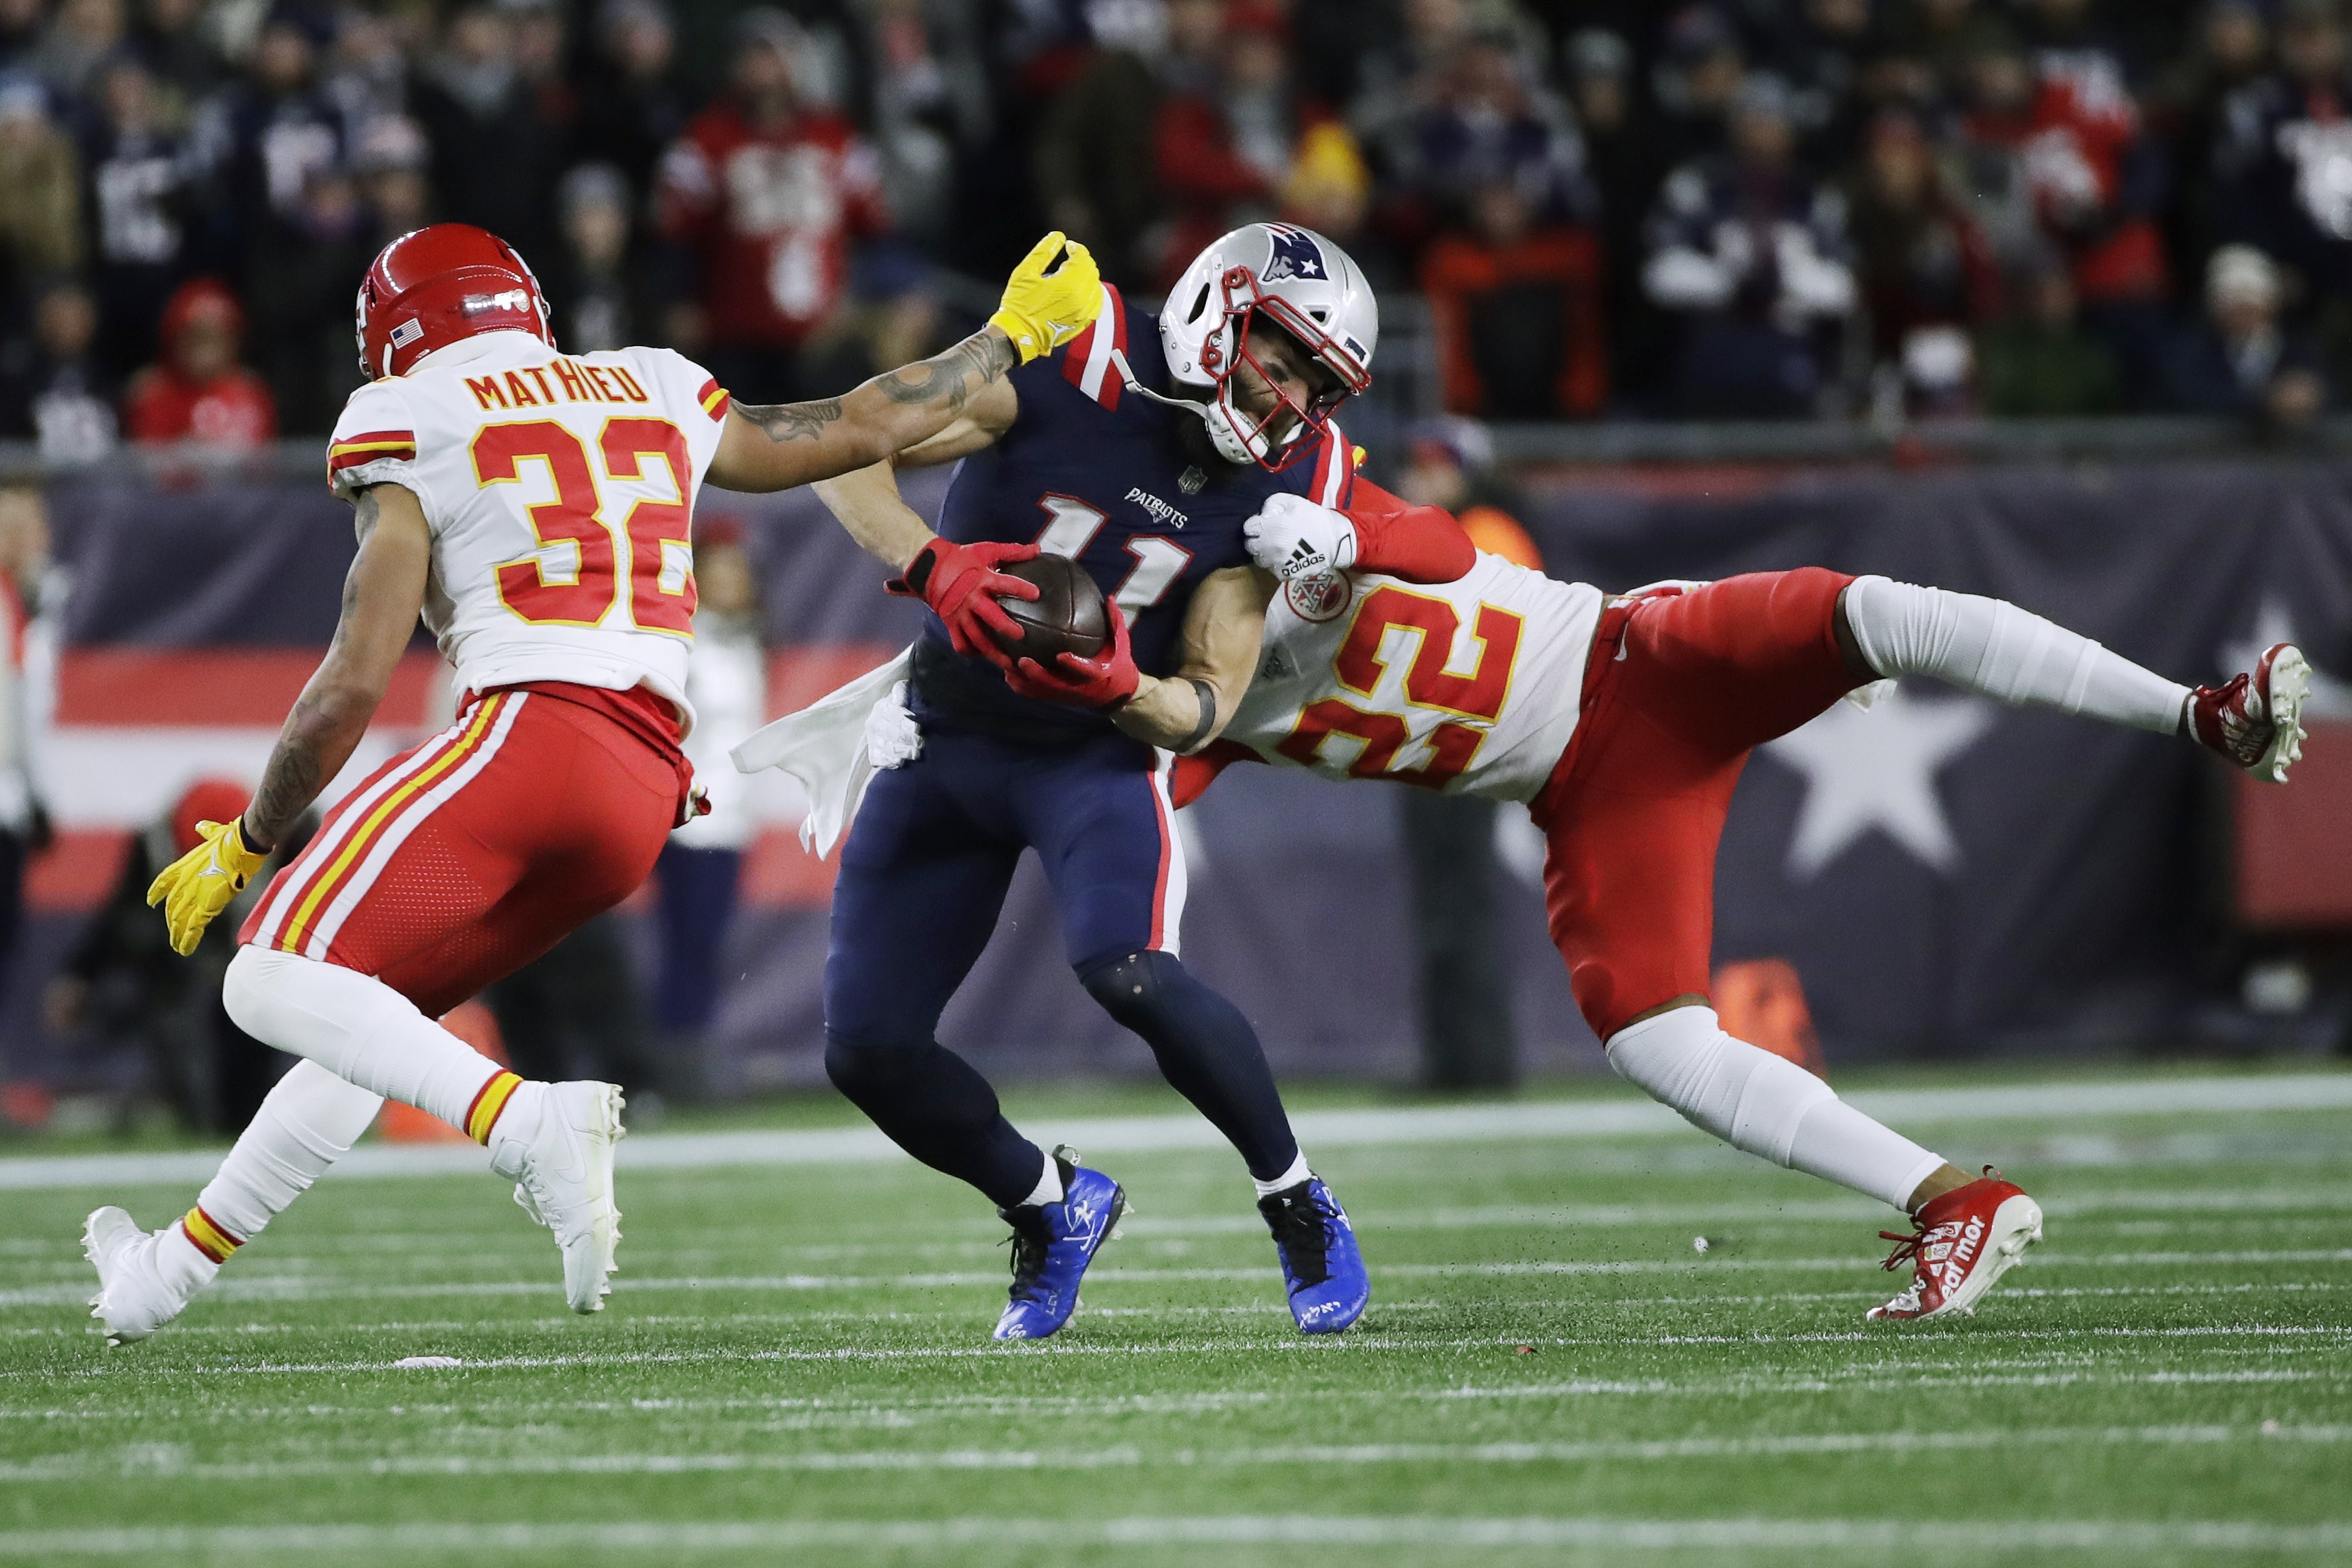 This is new: Chiefs lean on defense rather than offense to beat Patriots